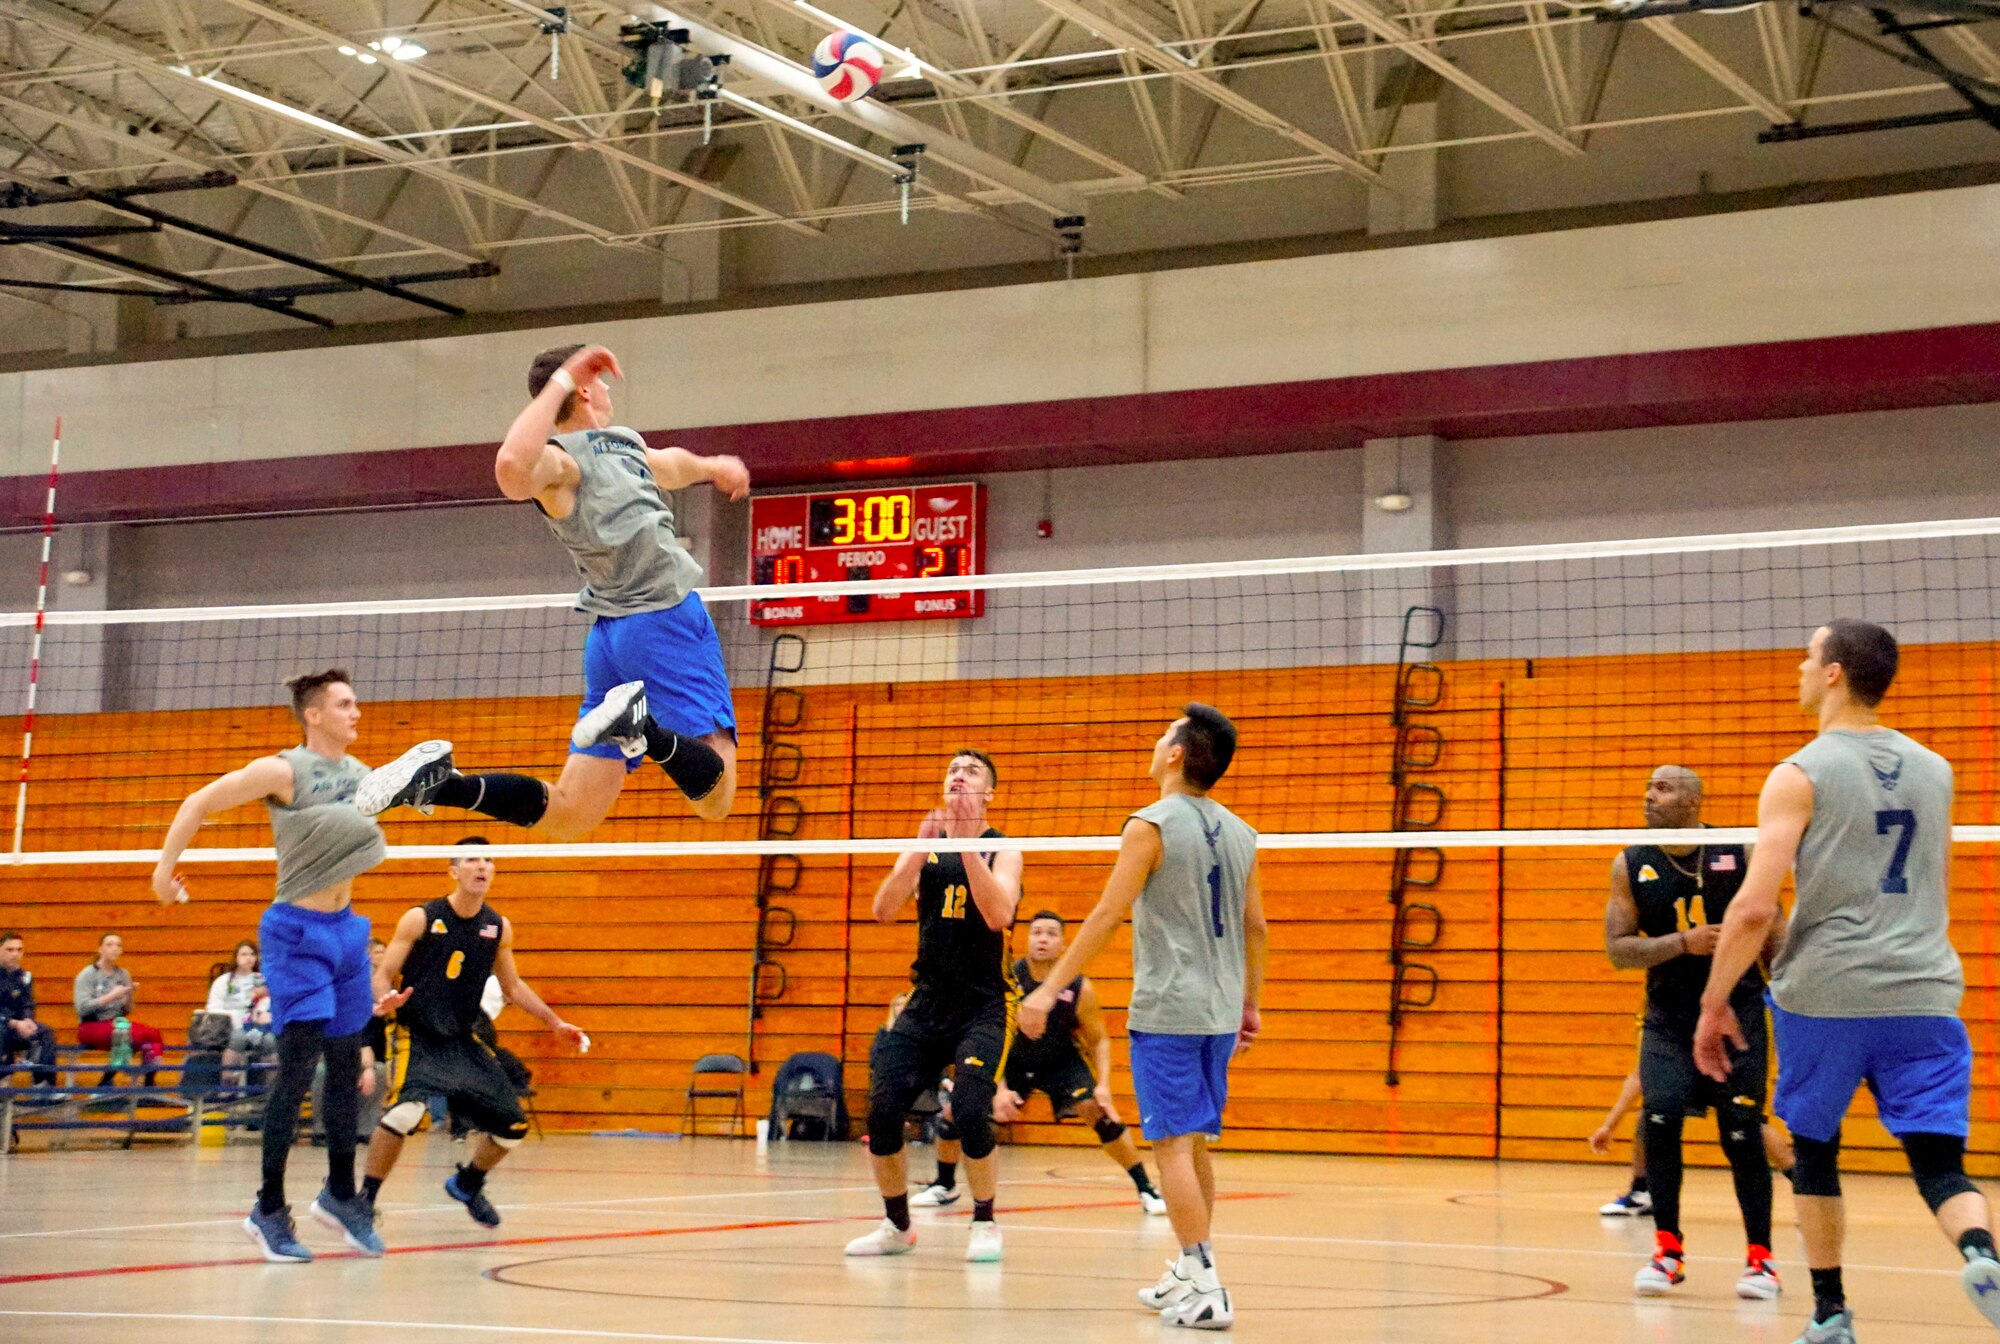 Elite U.S. military volleyball players from around the world compete for dominance at Fort Bragg's Ritz Epps Physical Fitness Center March 6-8, 2019 to determine the best of the best at the 2019 Armed Forces Volleyball Championship. Army, Navy (with Coast Guard) and Air Force teams squared off at the annual AFVC through three days of round-robin competition, to eventually crown the best men and women volleyball players in the military. U.S. Navy photo by Mass Communications Specialist 1st Class John Benson (Released)